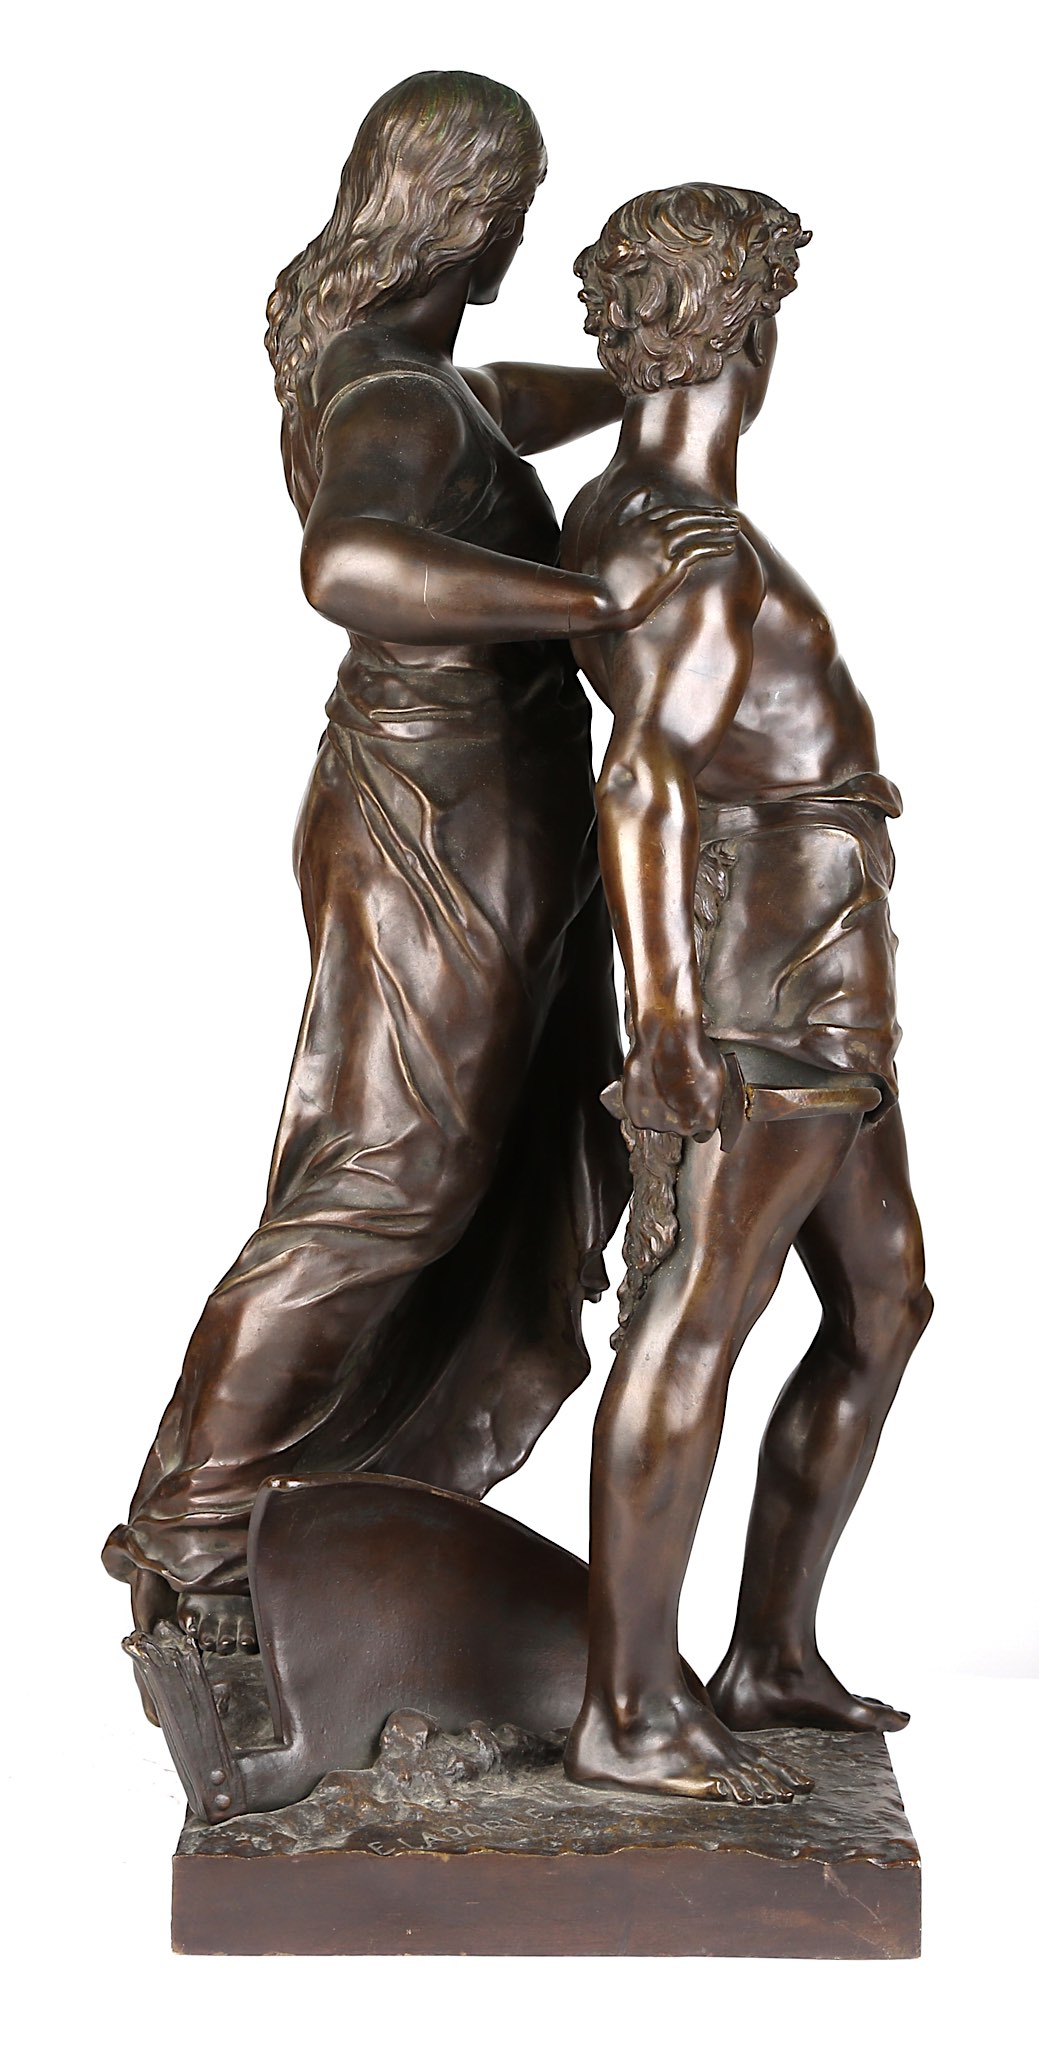 EMILE LAPORTE (FRENCH, 1858-1907): A LARGE BRONZE FIGURAL GROUP OF A MALE AND FEMALE the semi-clad - Image 7 of 11